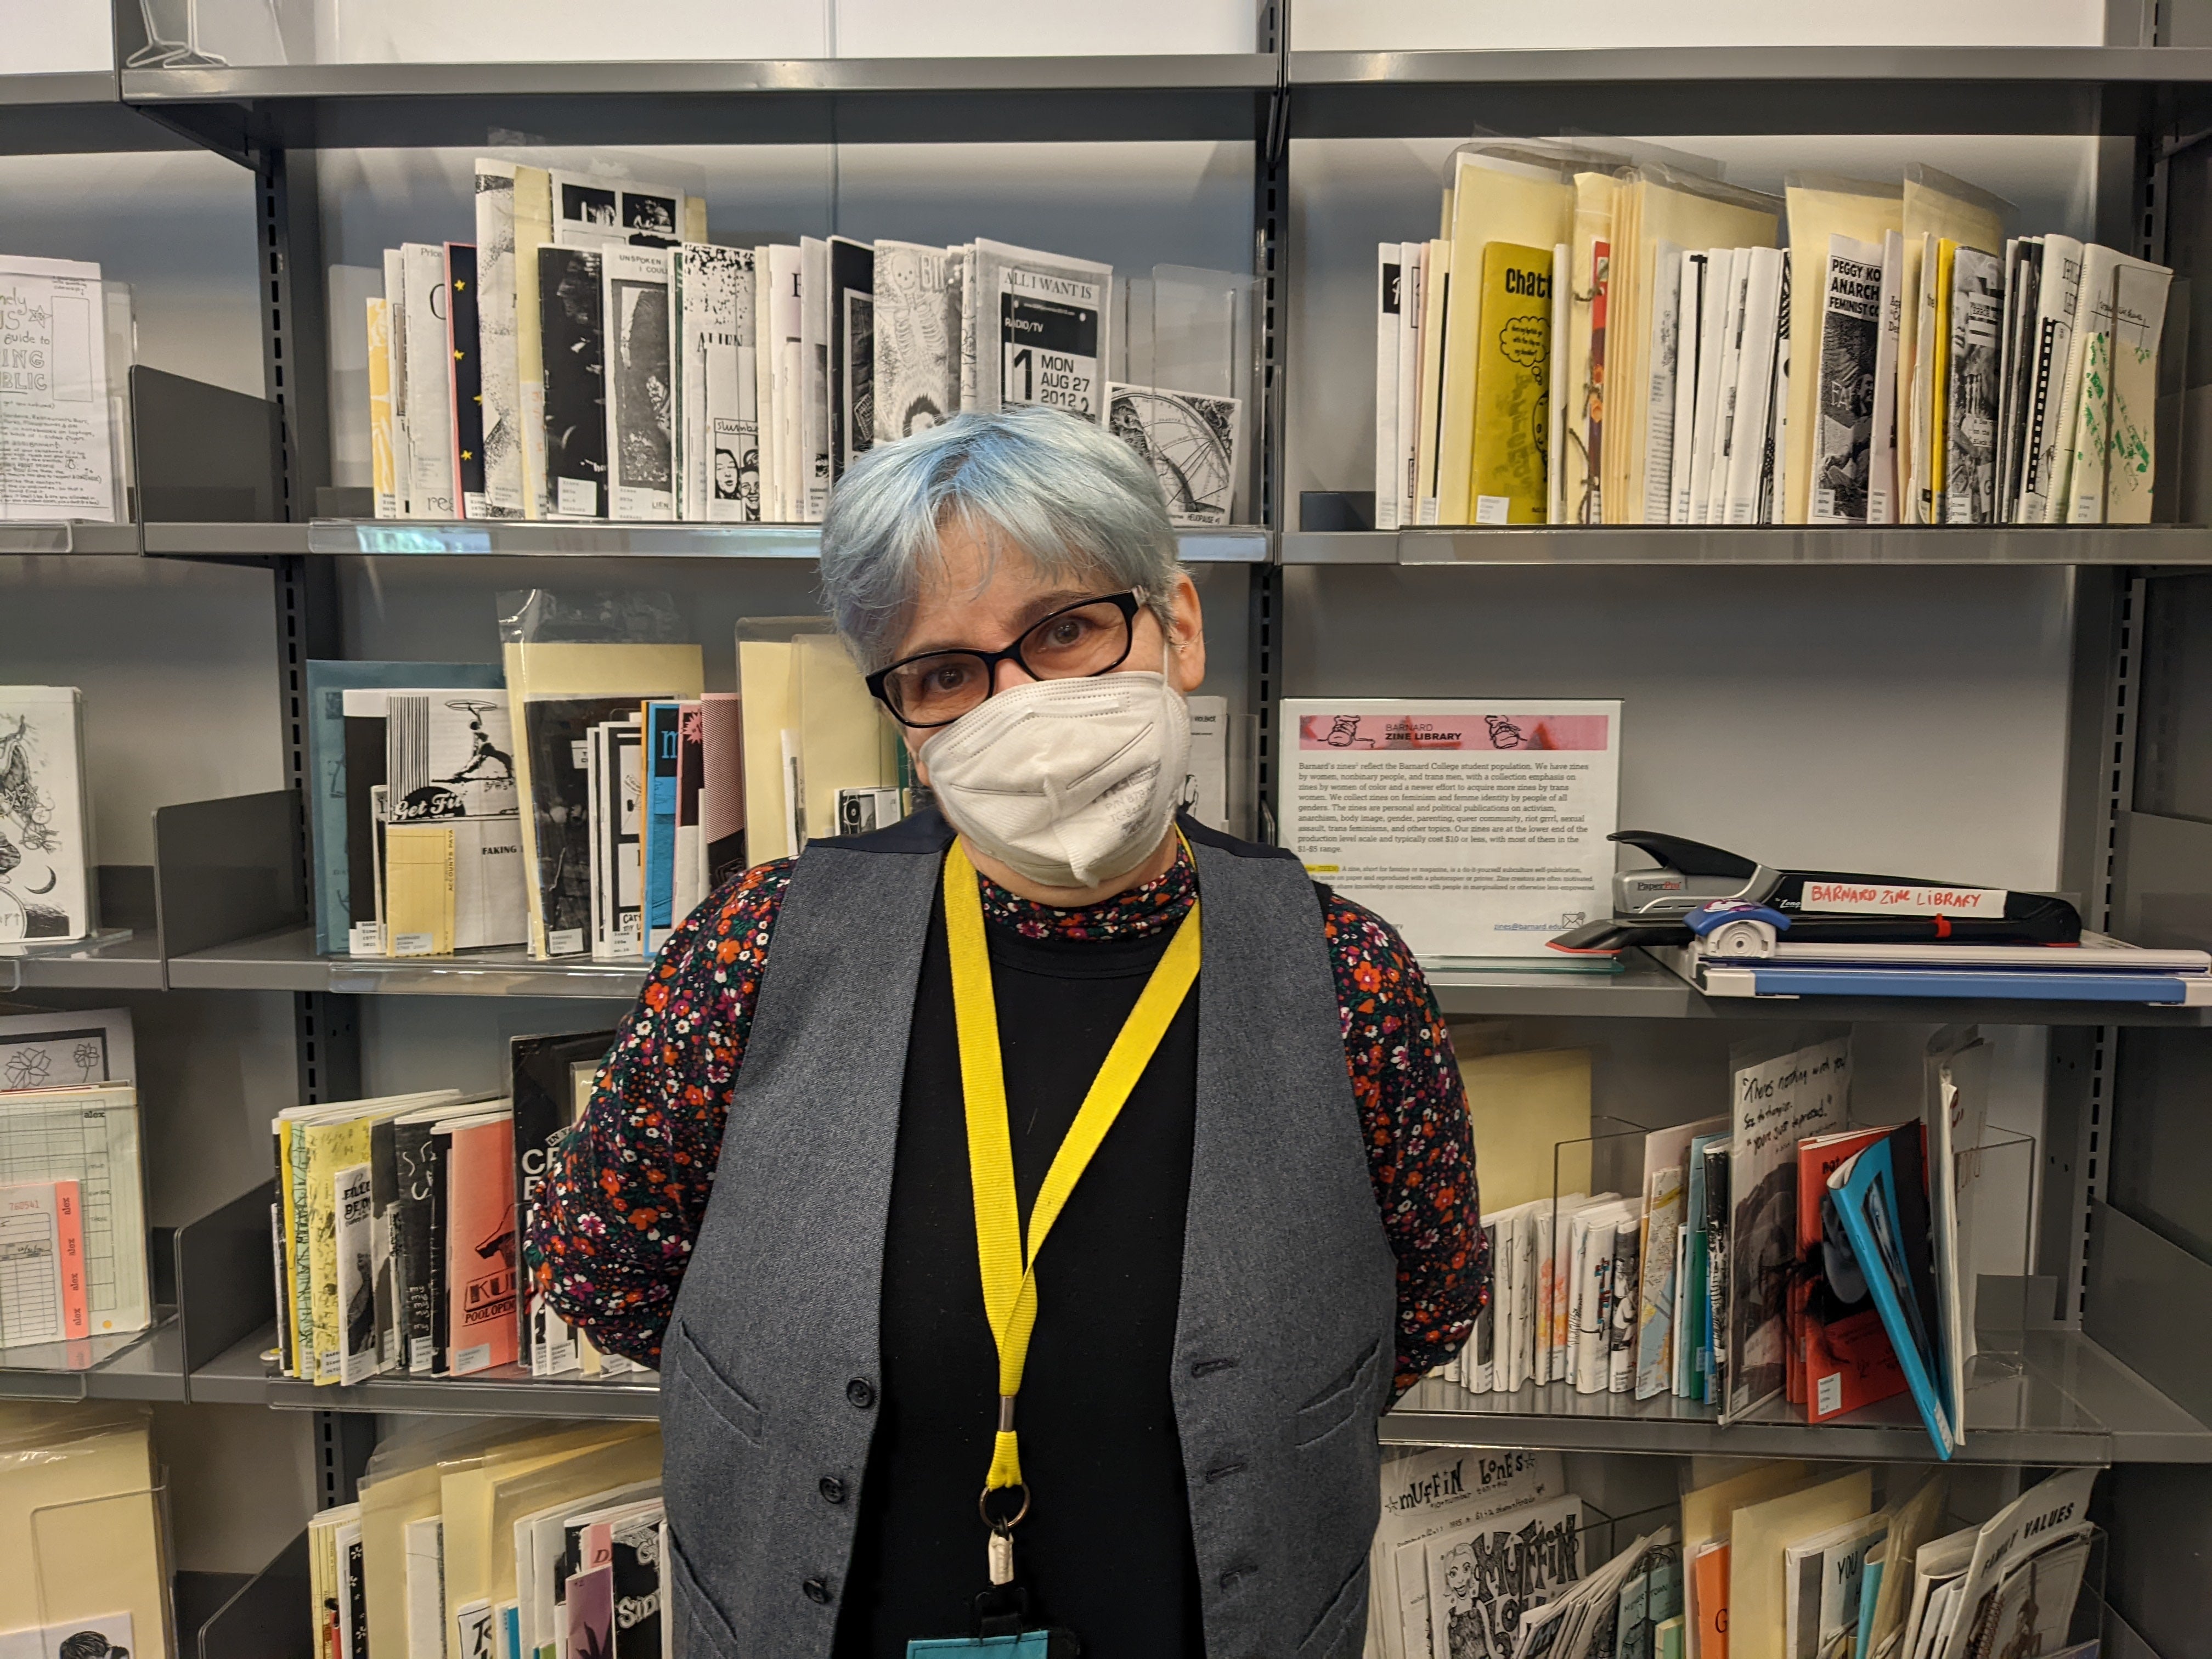 Zine librarian Jenna Freedman with short colored hair, wearing glasses, a mask, and a yellow lanyard in front of shelves featuring zines